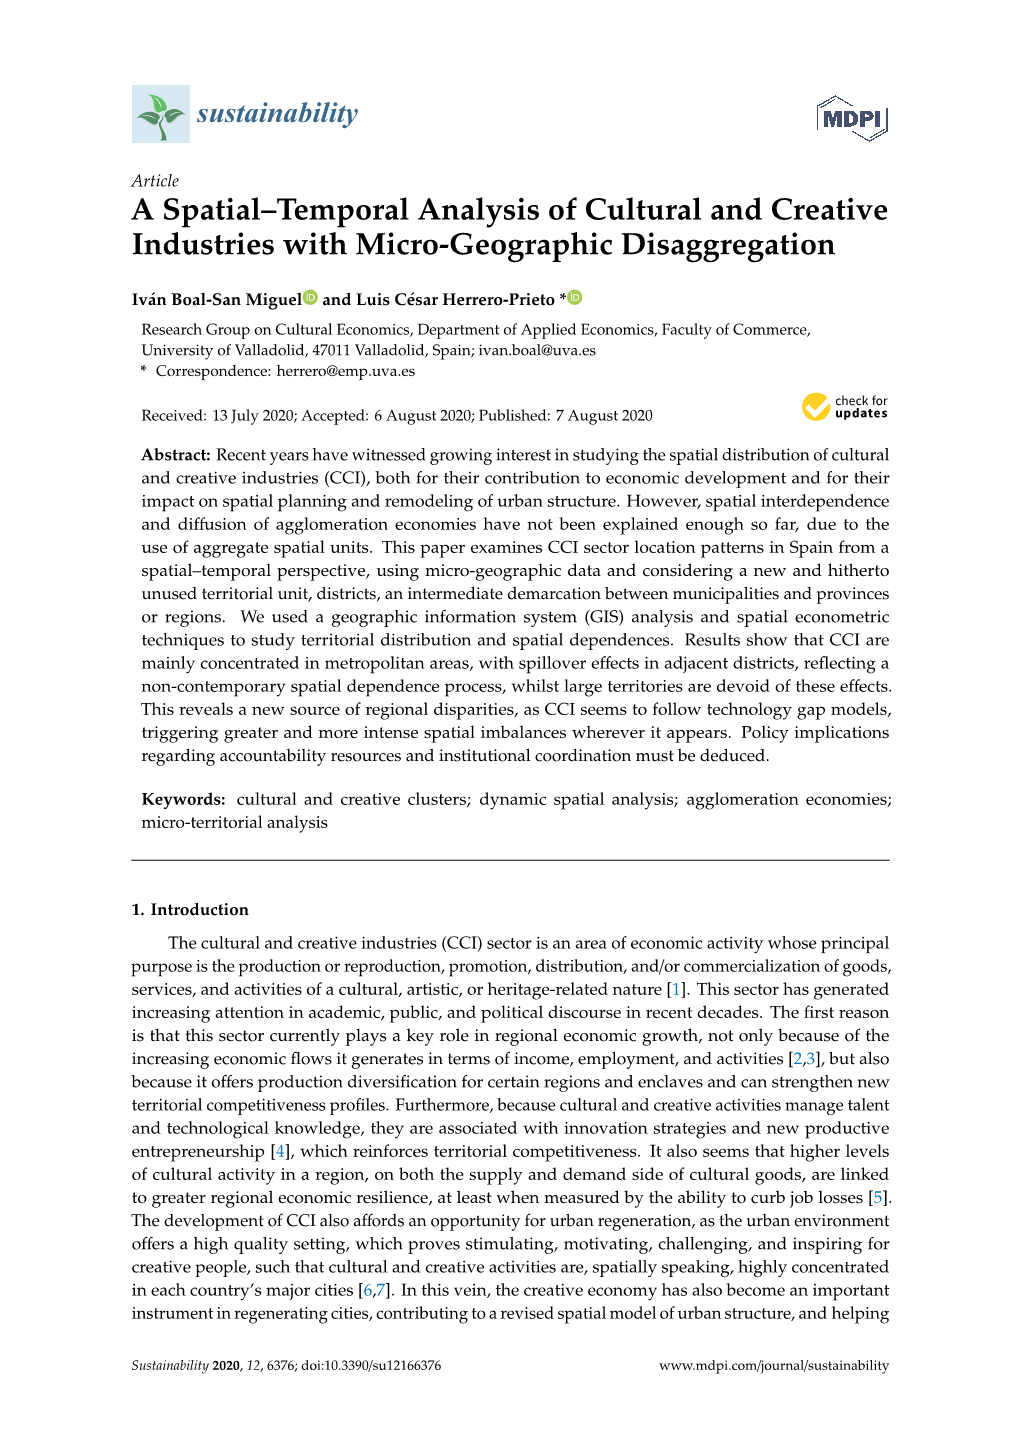 A Spatial–Temporal Analysis of Cultural and Creative Industries with Micro-Geographic Disaggregation